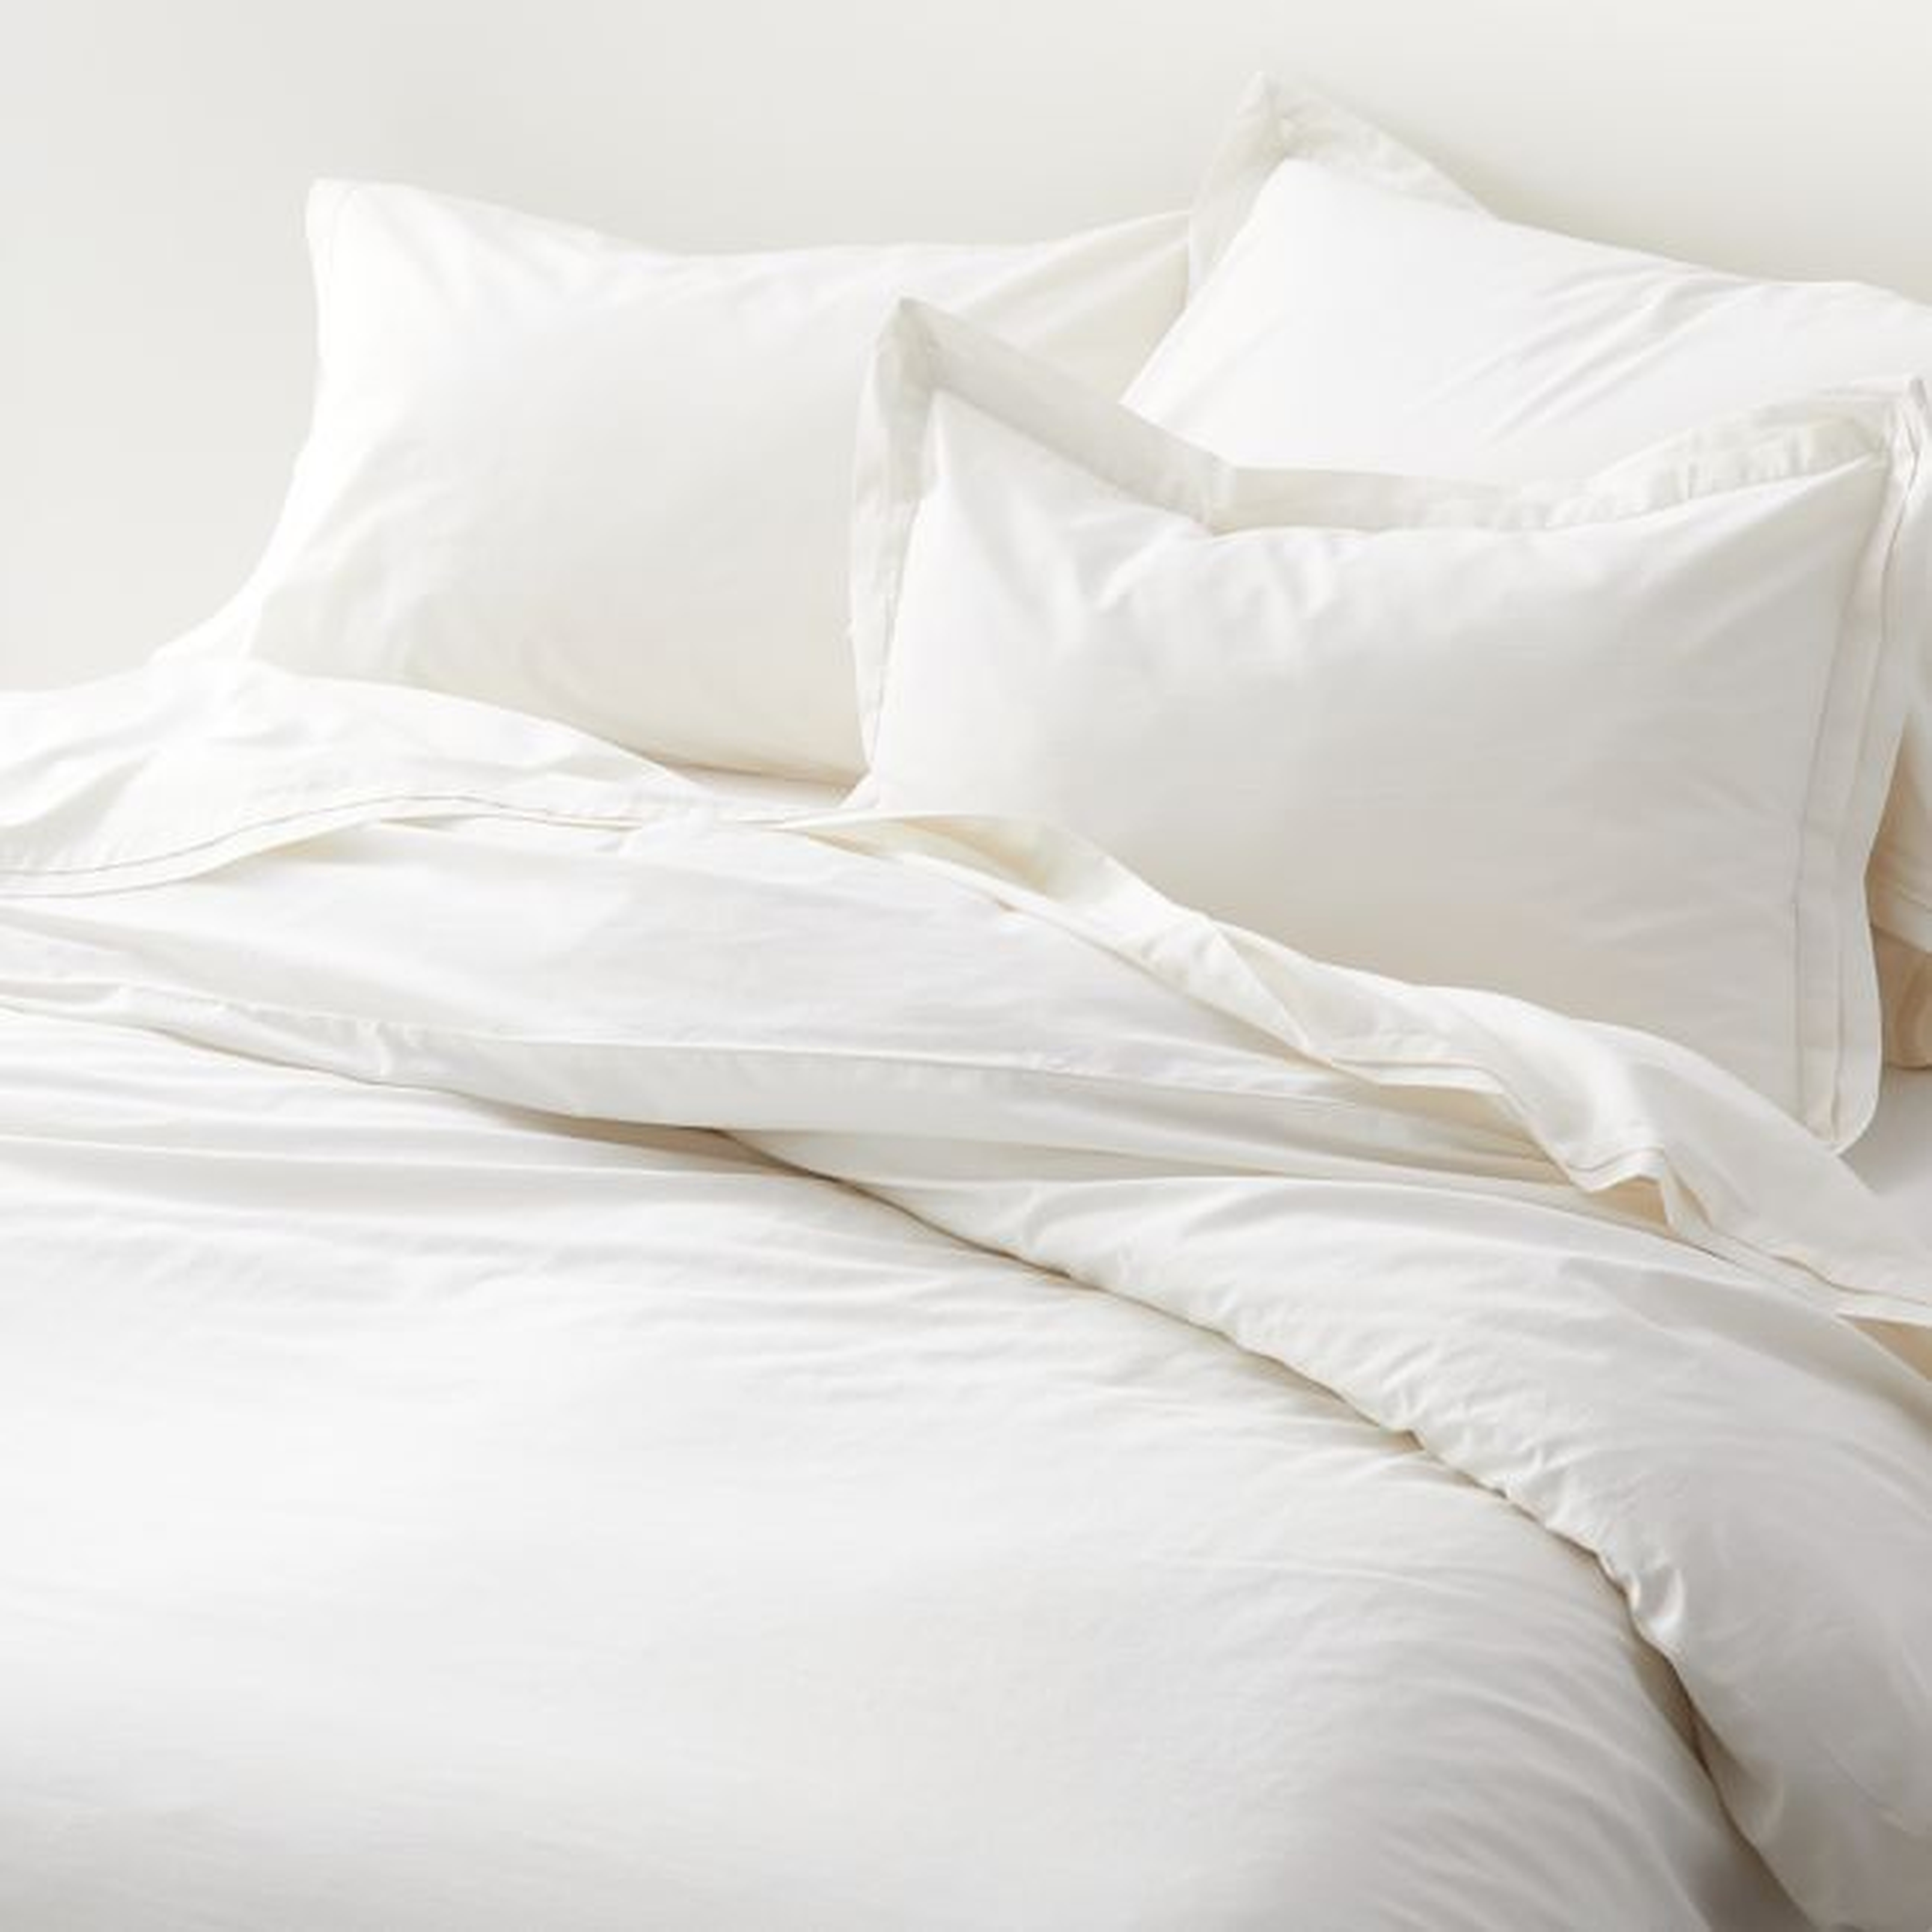 Mellow Organic Cotton Duvet Cover, Pearl, King - Crate and Barrel